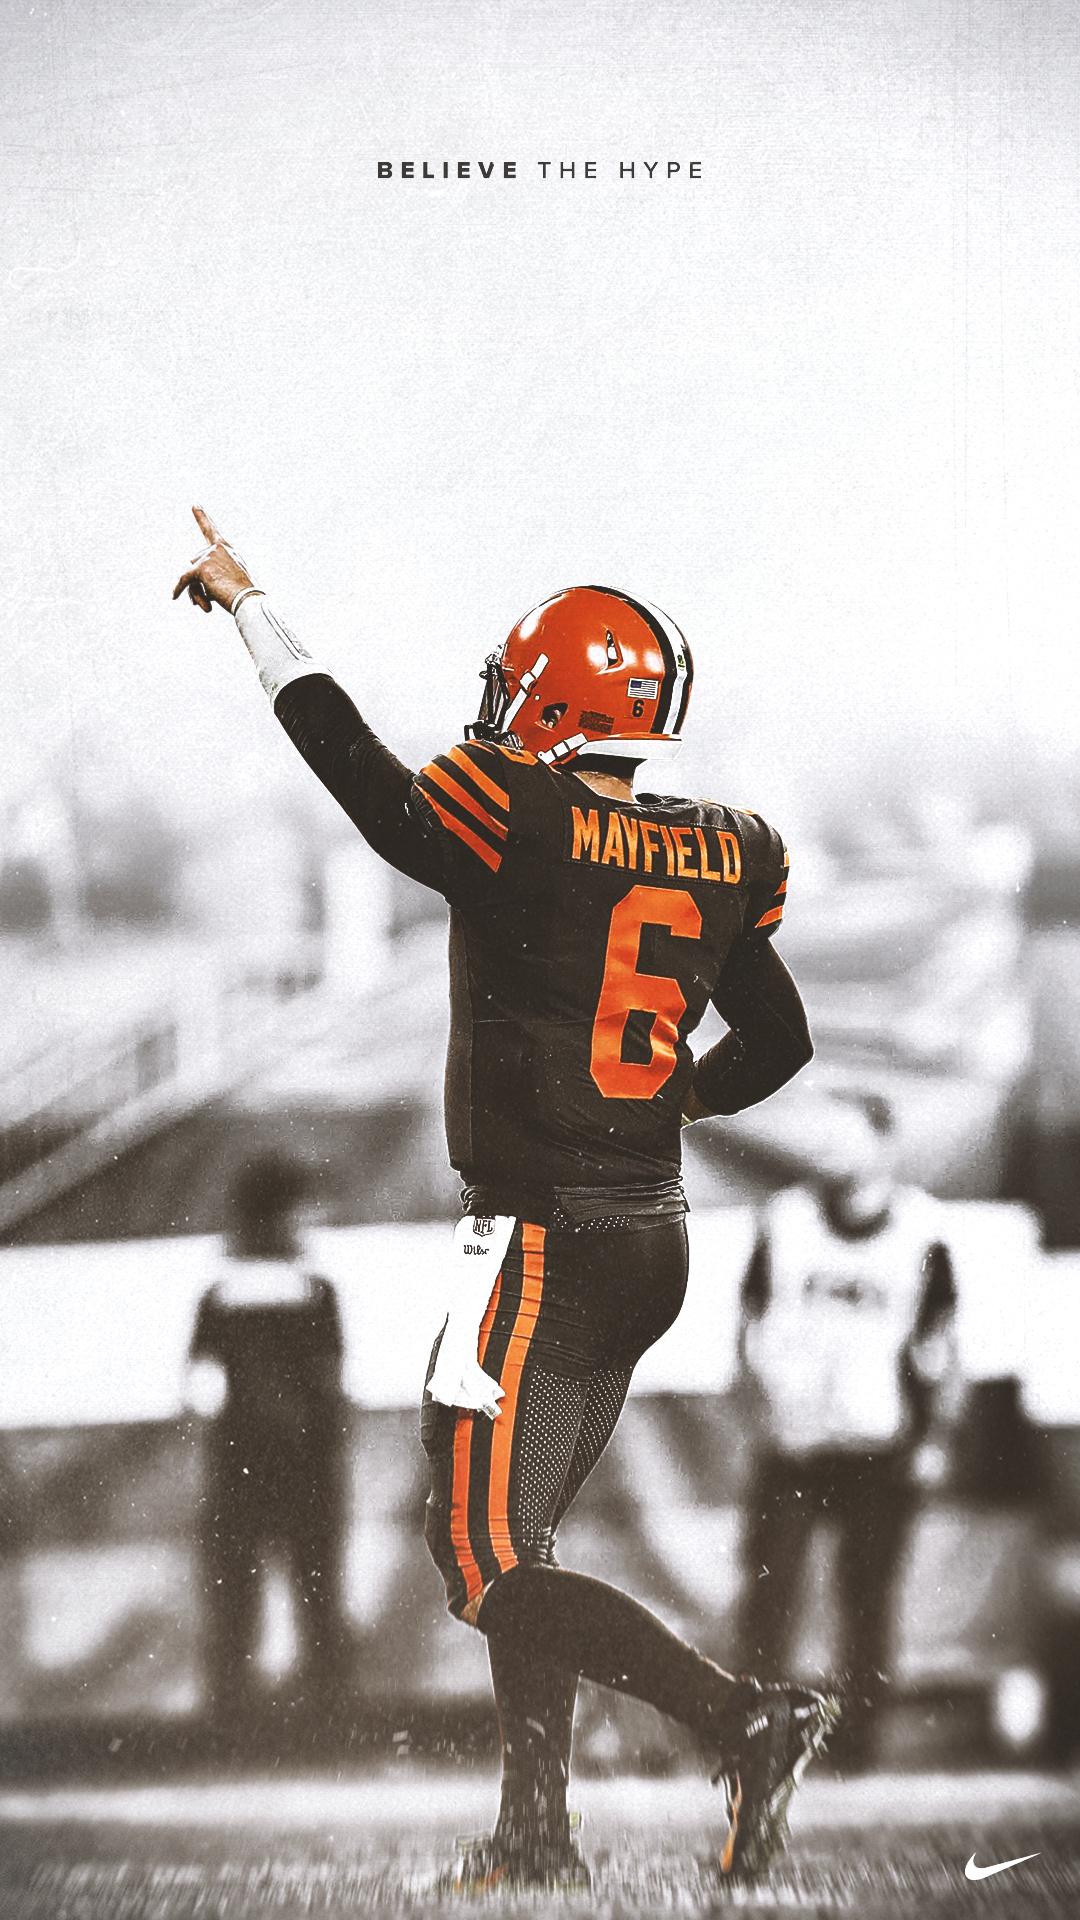 Cleveland Browns - Desktop Wallpapers, Phone Wallpaper, PFP, Gifs, and More!